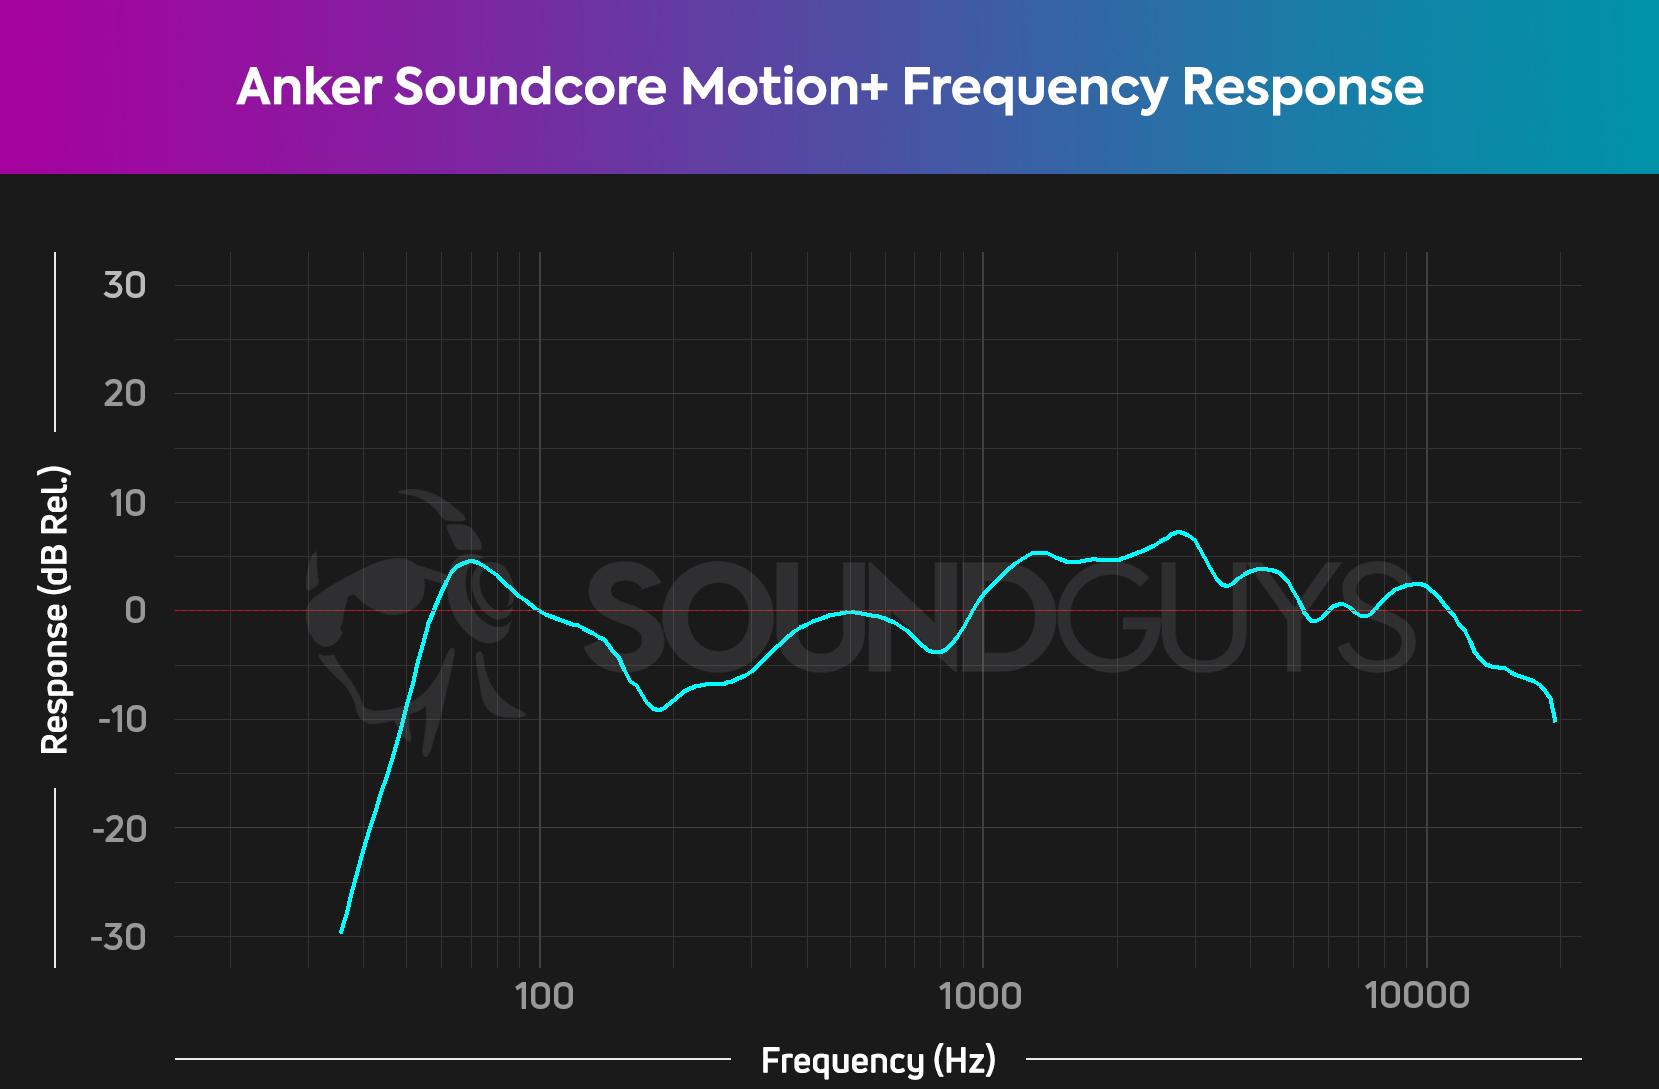 A chart depicts the frequency response for the Anker Soundcore Motion+ Bluetooth speaker, revealing its non-existent sub-bass and slightly under-emphasized bass relative to the mids and treble.